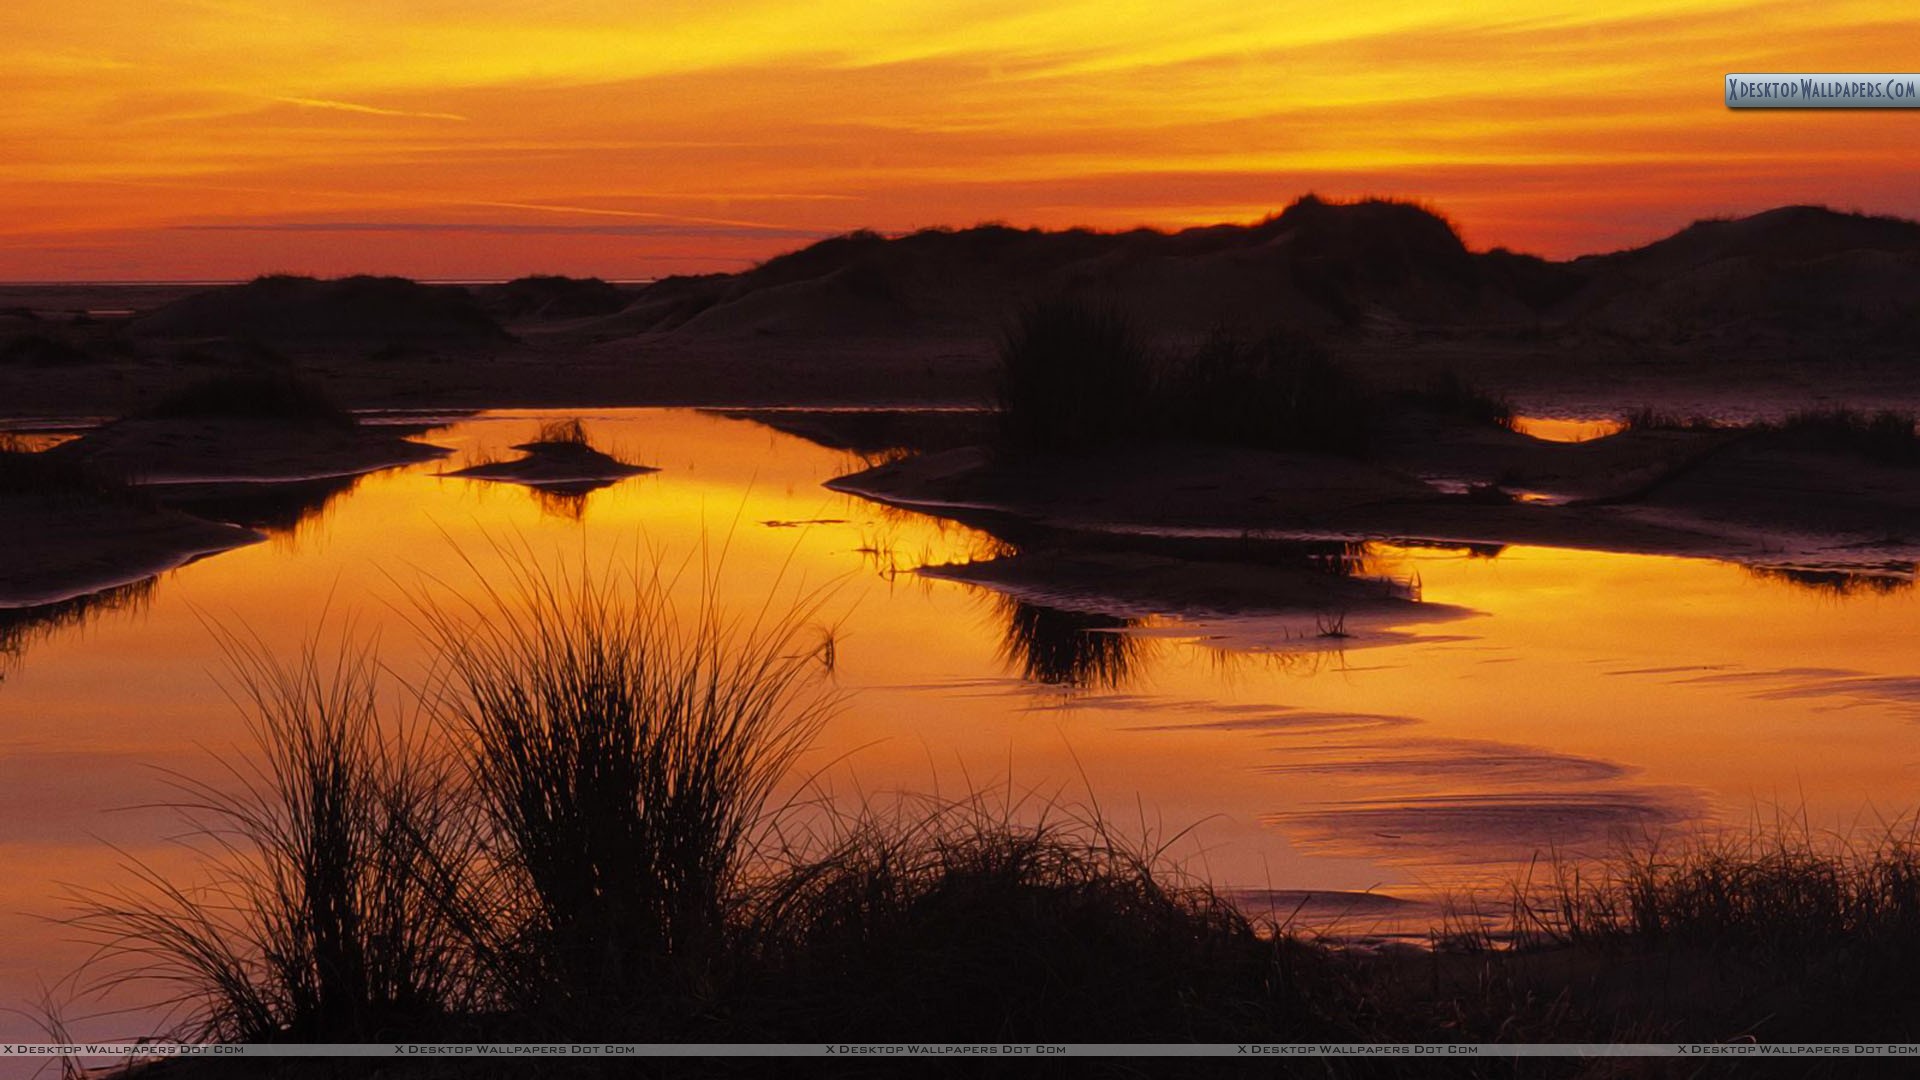 Wetland And Sand Dunes At Sunset Wallpaper